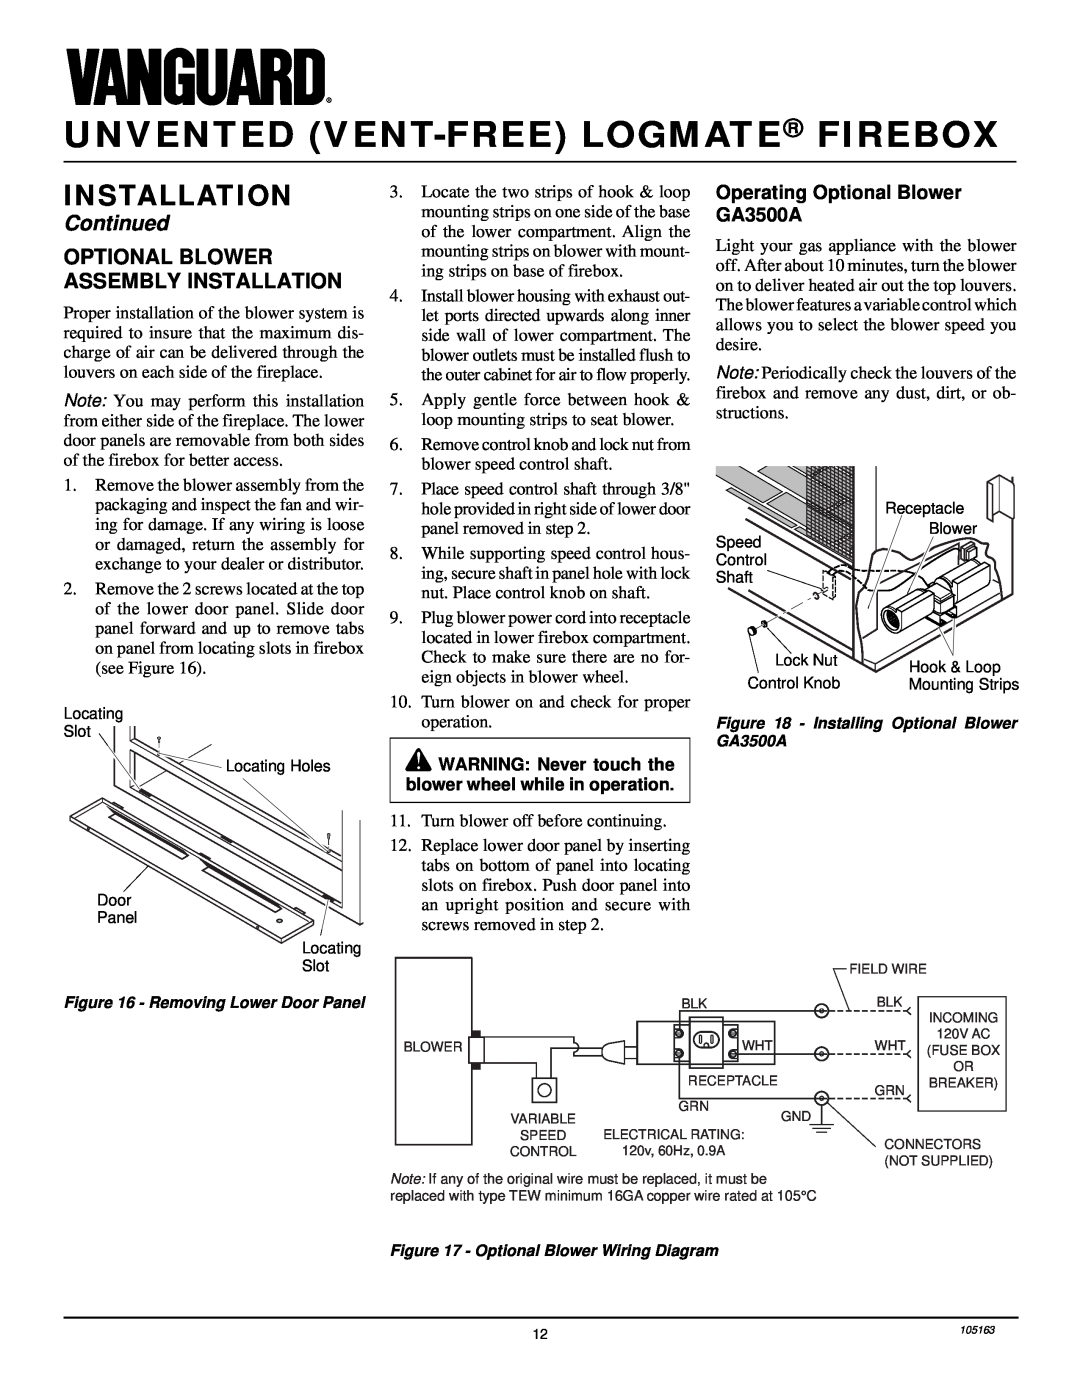 Desa FBPS installation manual Unvented Vent-Freelogmate Firebox, Continued, Optional Blower Assembly Installation 